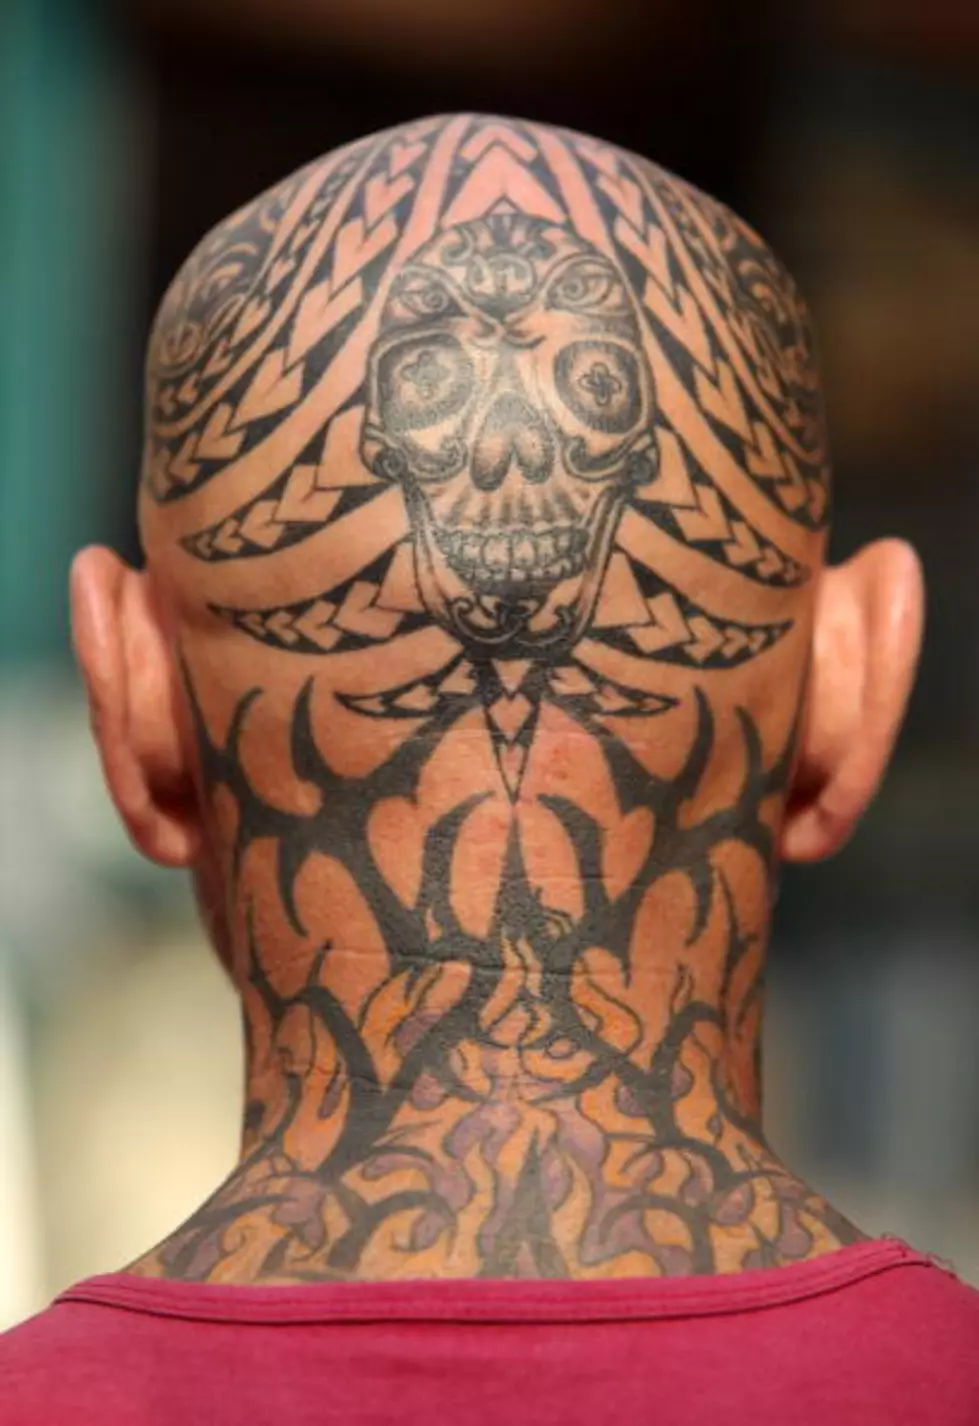 Tattoos And Eyeballs Don’t Mix! OUCH! [Video]